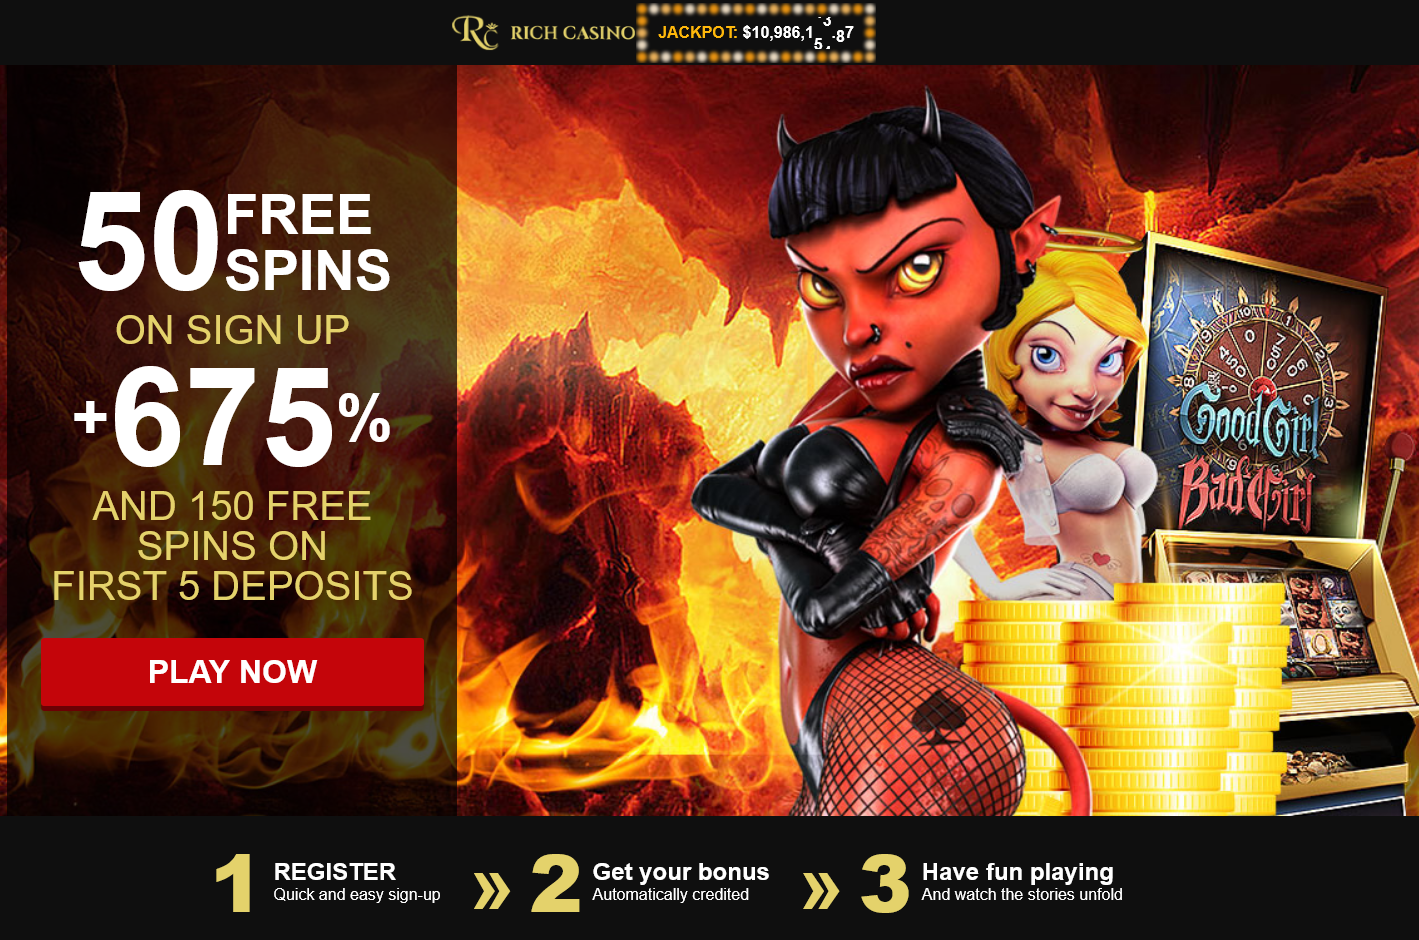 50 FREE SPINS ON SIGN UP